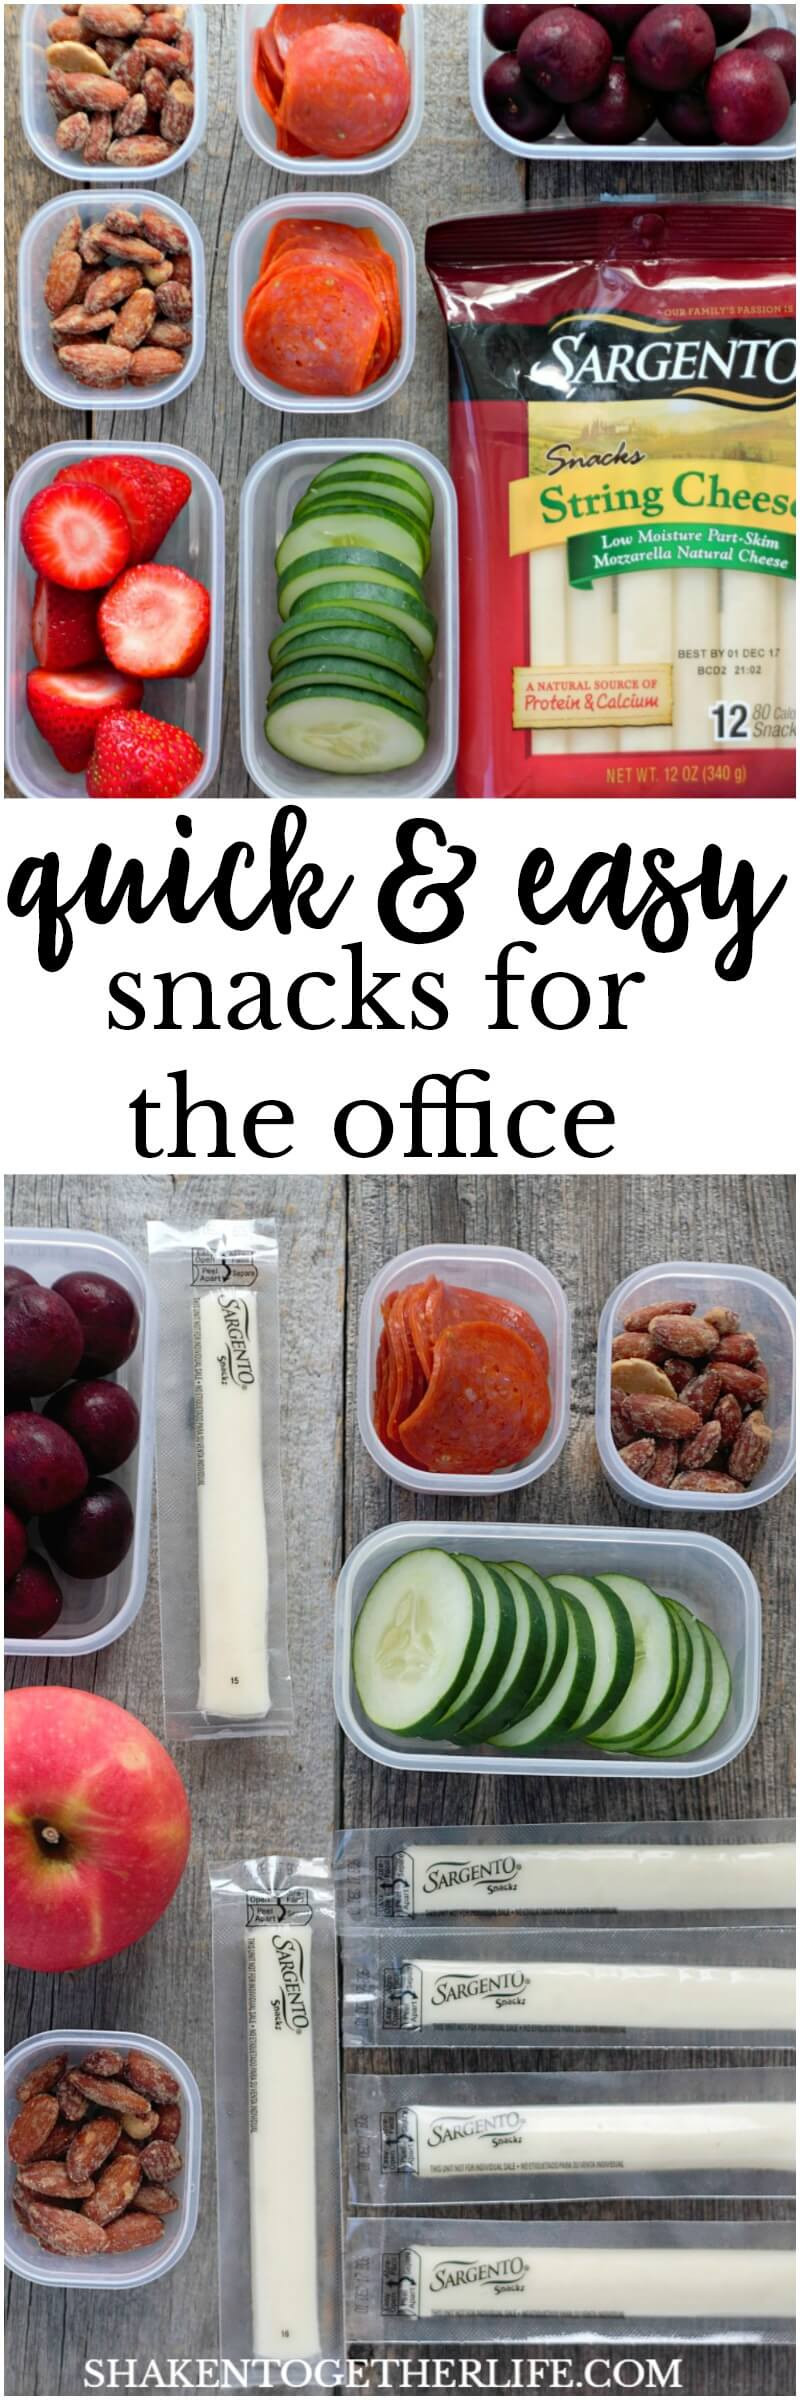 Quick Healthy Snacks
 Quick & Easy Snacks for the fice